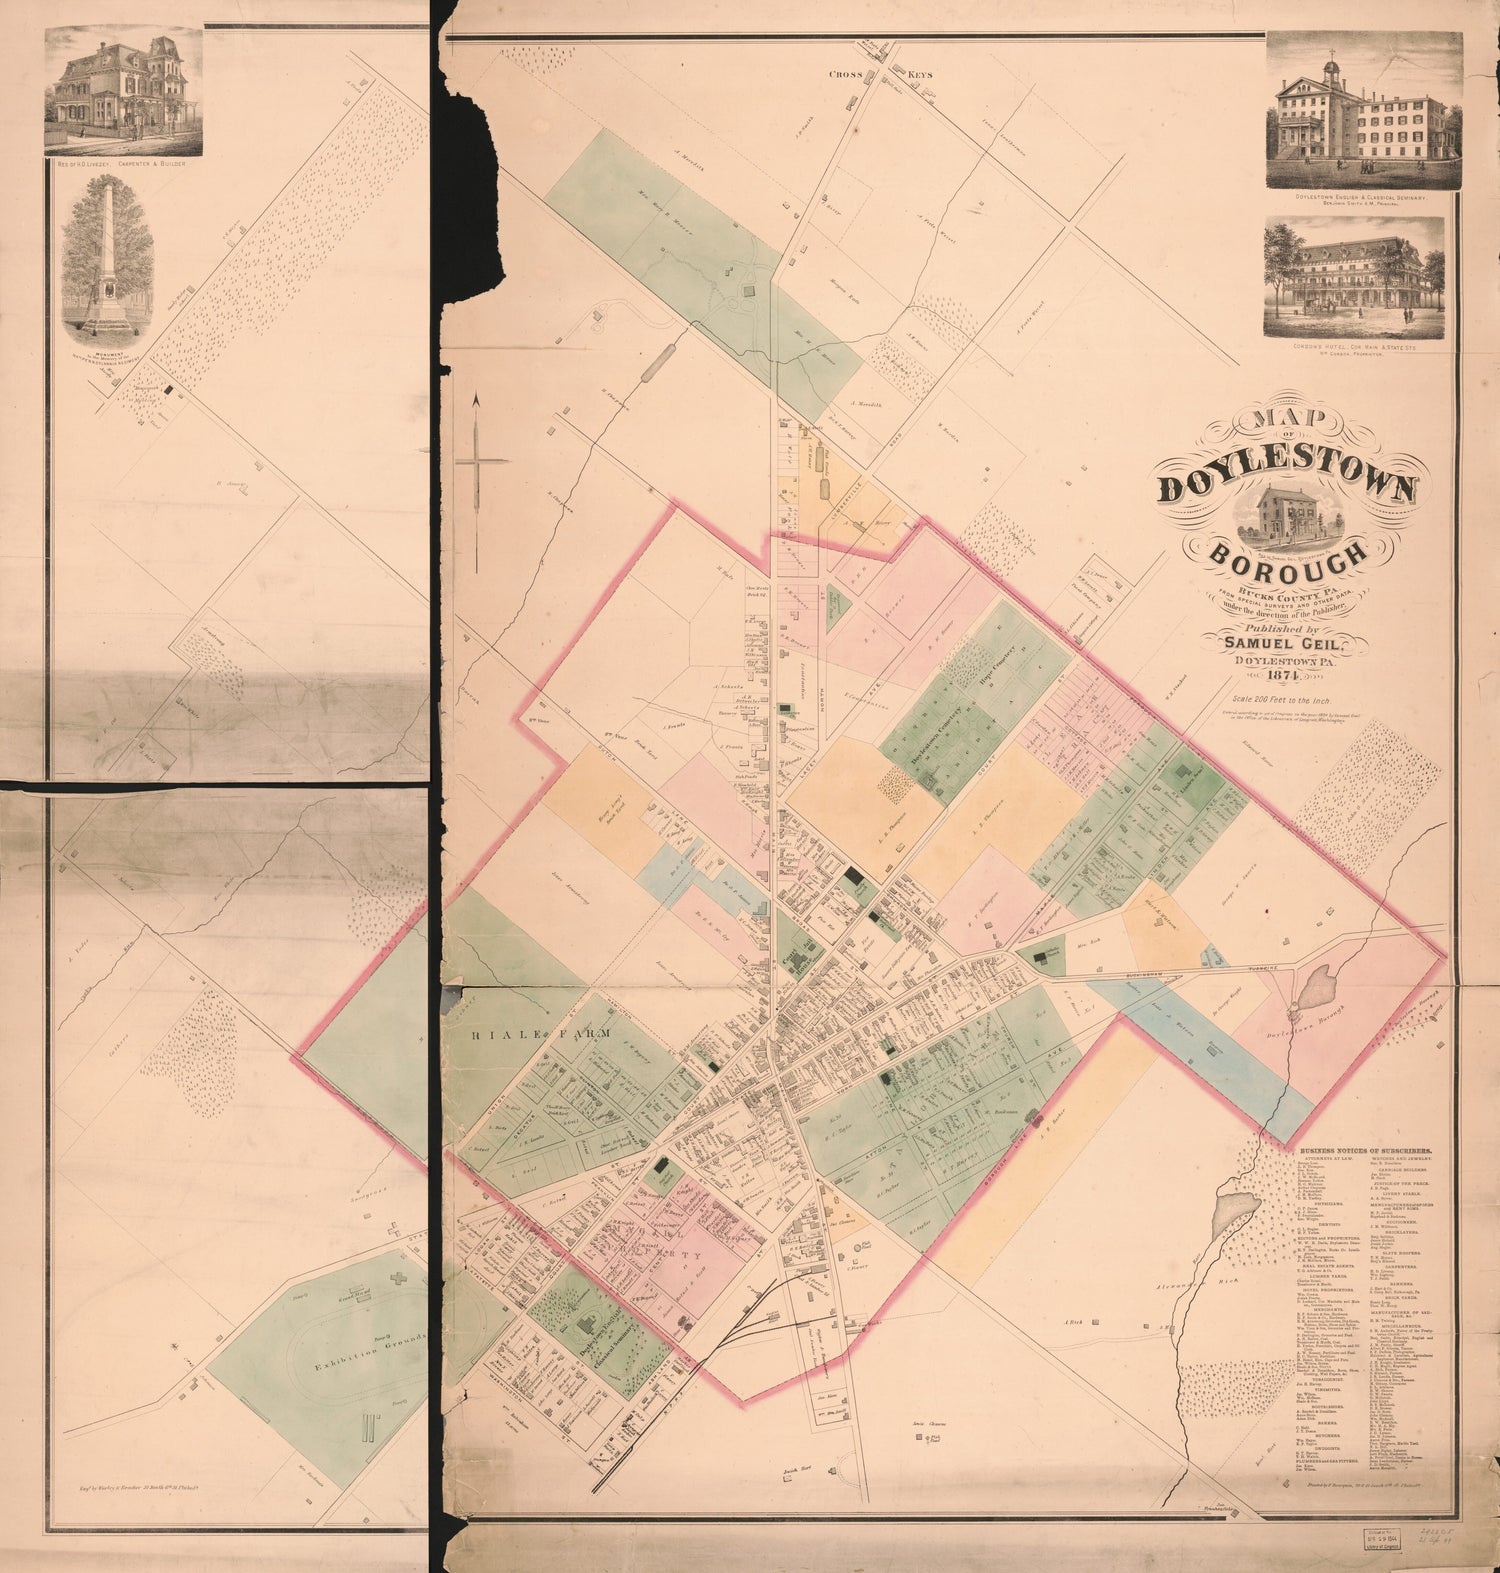 This old map of Map of Doylestown Borough, Bucks County Pennsylvania : from Special Surveys and Other Data, Under the Direction of the Publisher from 1874 was created by F. (Frederick) Bourquin, Samuel Geil,  Worley &amp; Bracher in 1874